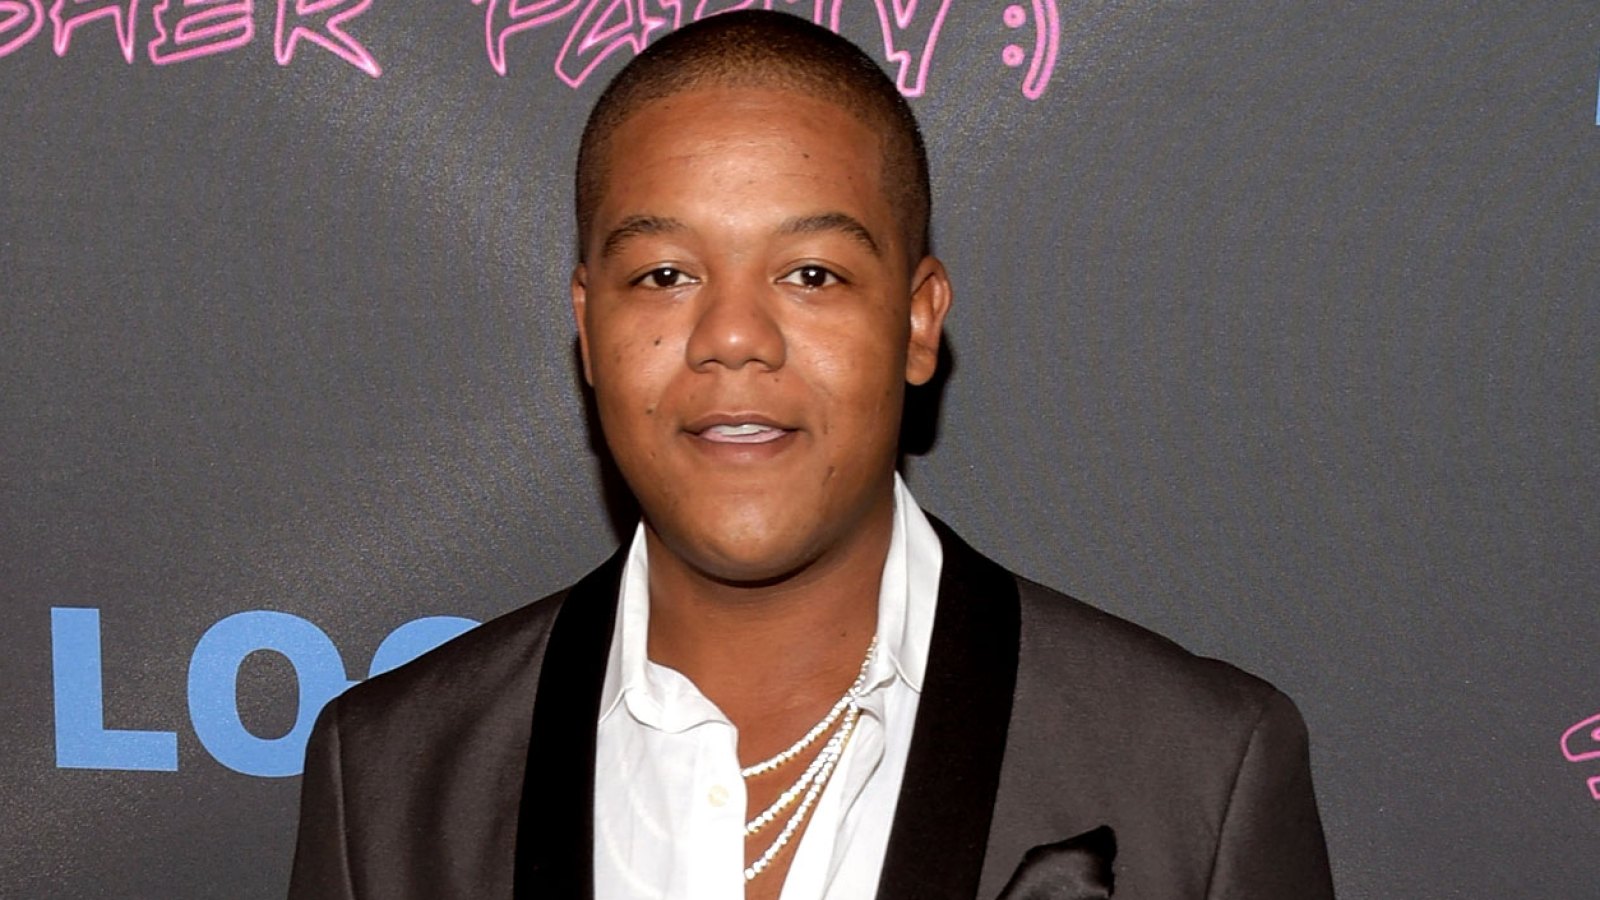 Kyle Massey Reportedly Sued for Sending Explicit Messages to 13-Year-Old